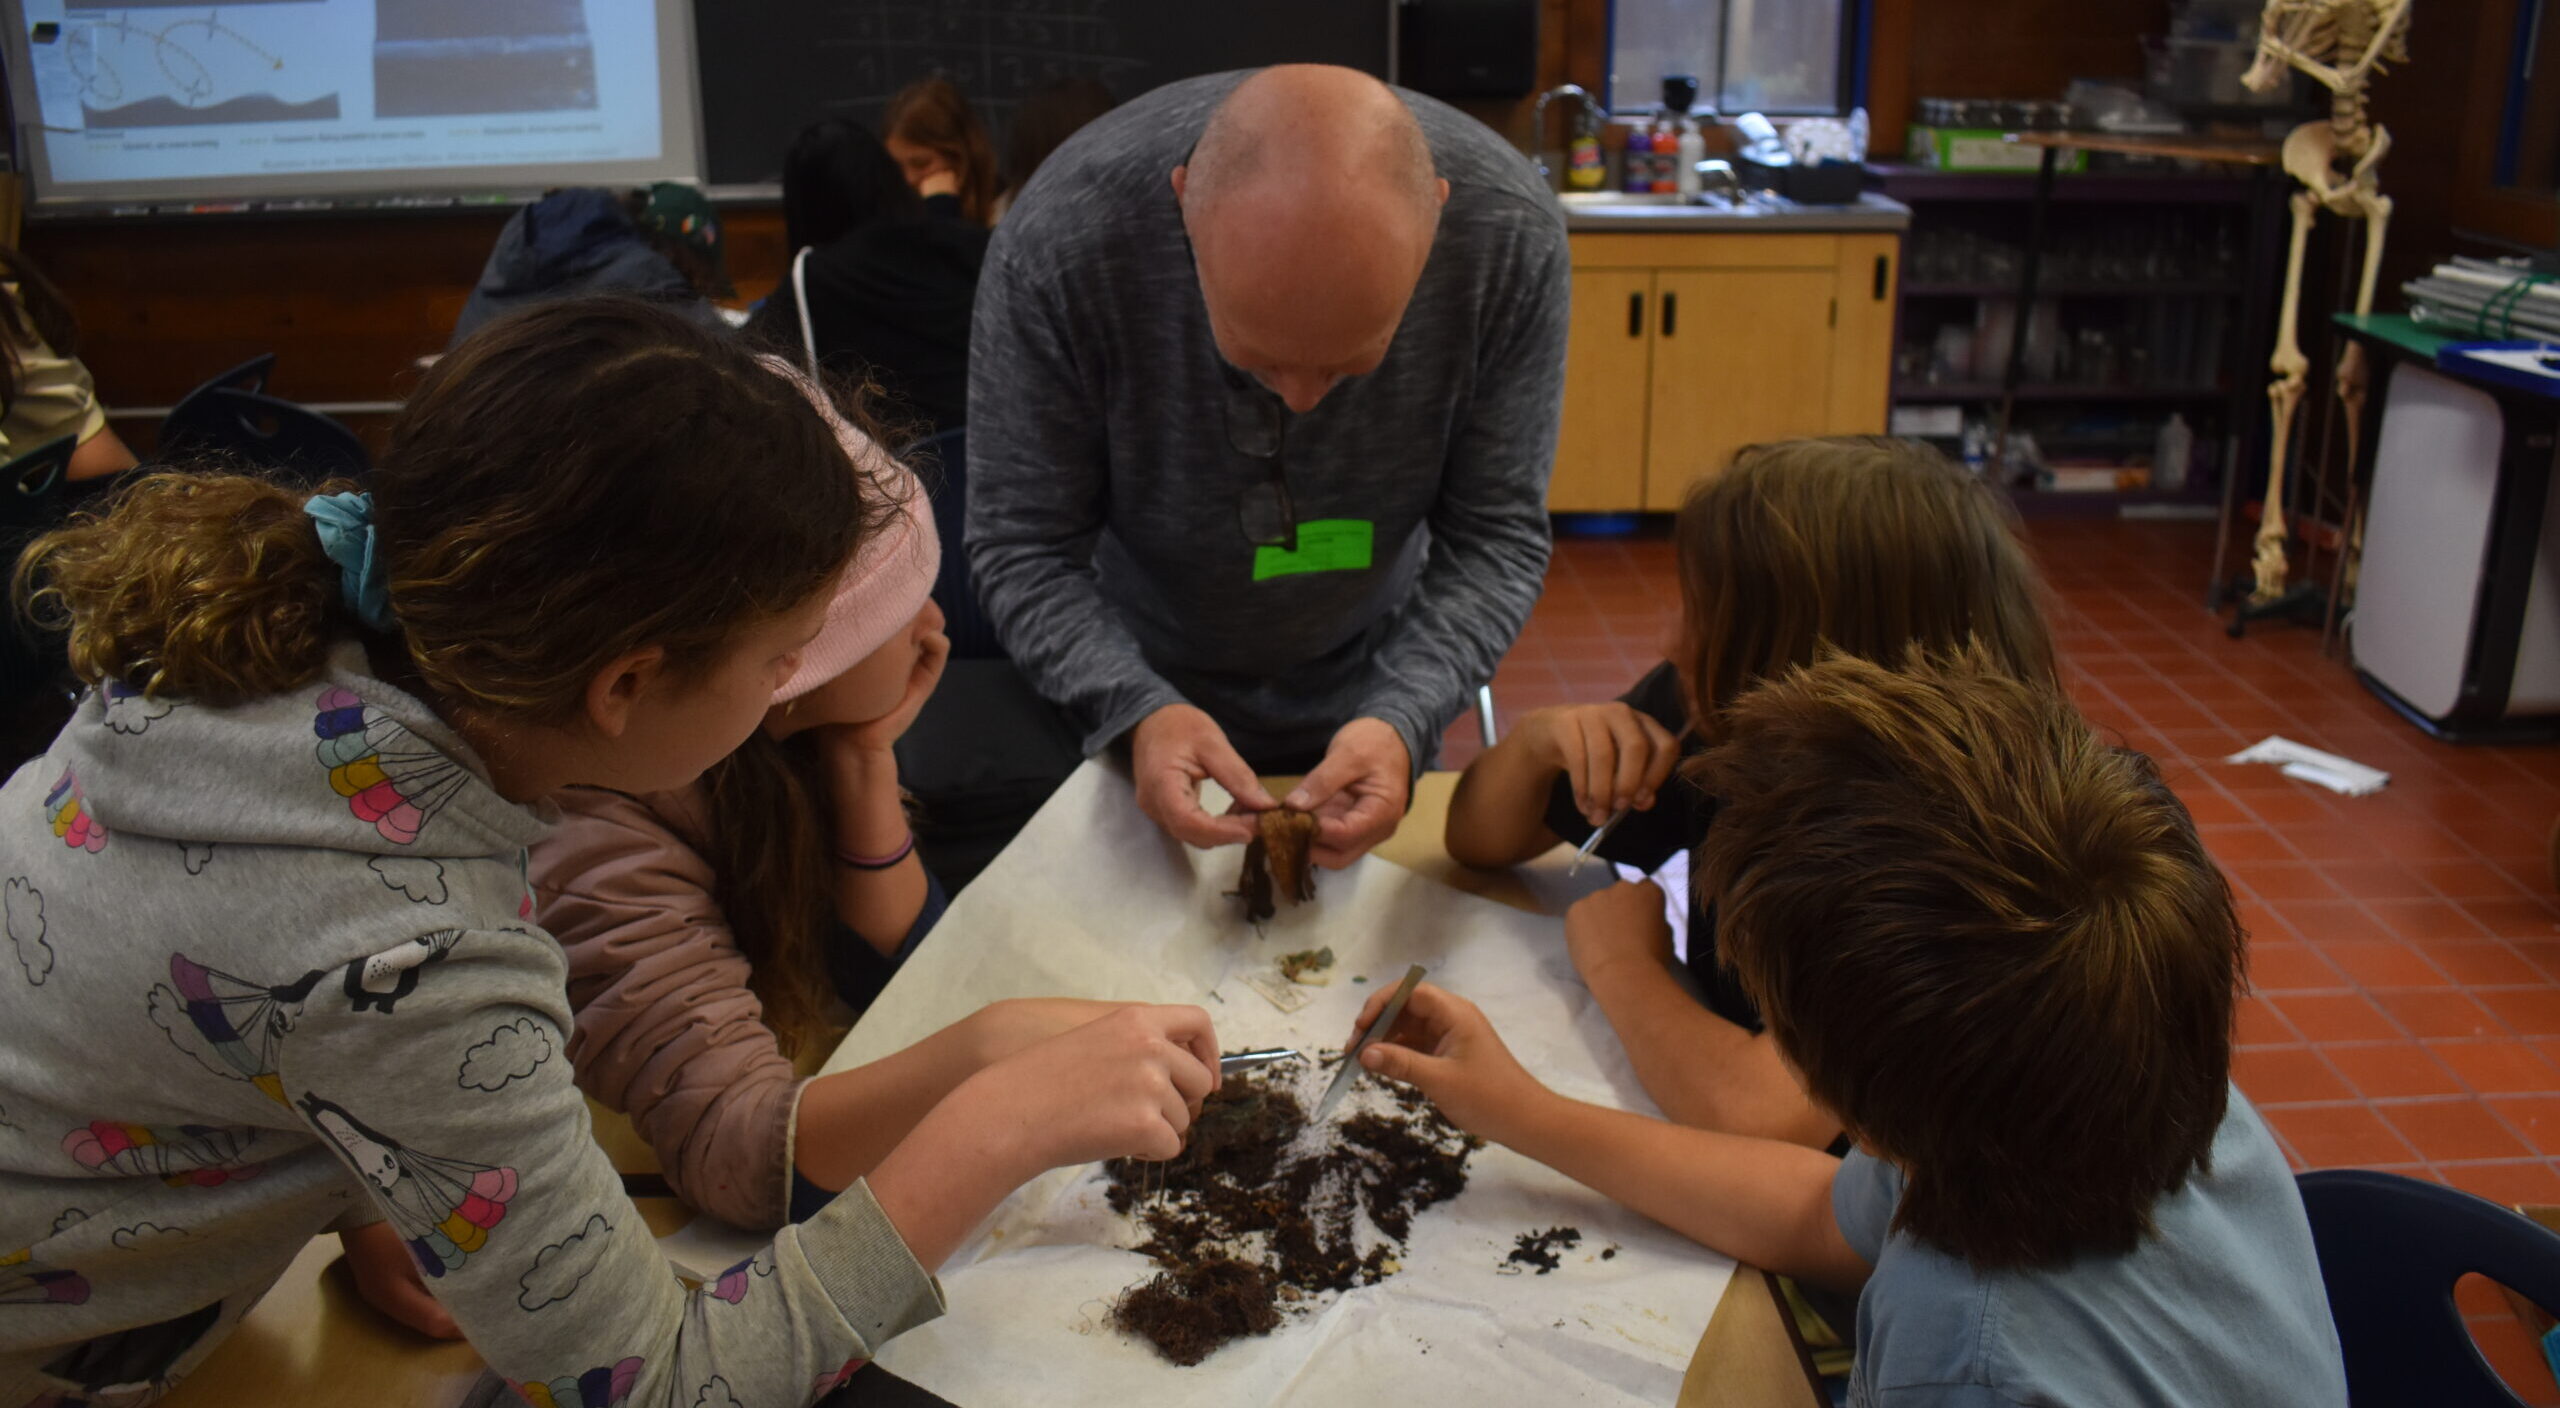 Pete Winch and students huddle around a table with vegetation and dirt. Pete is showing students how to sort through the dirt to find squid beaks.